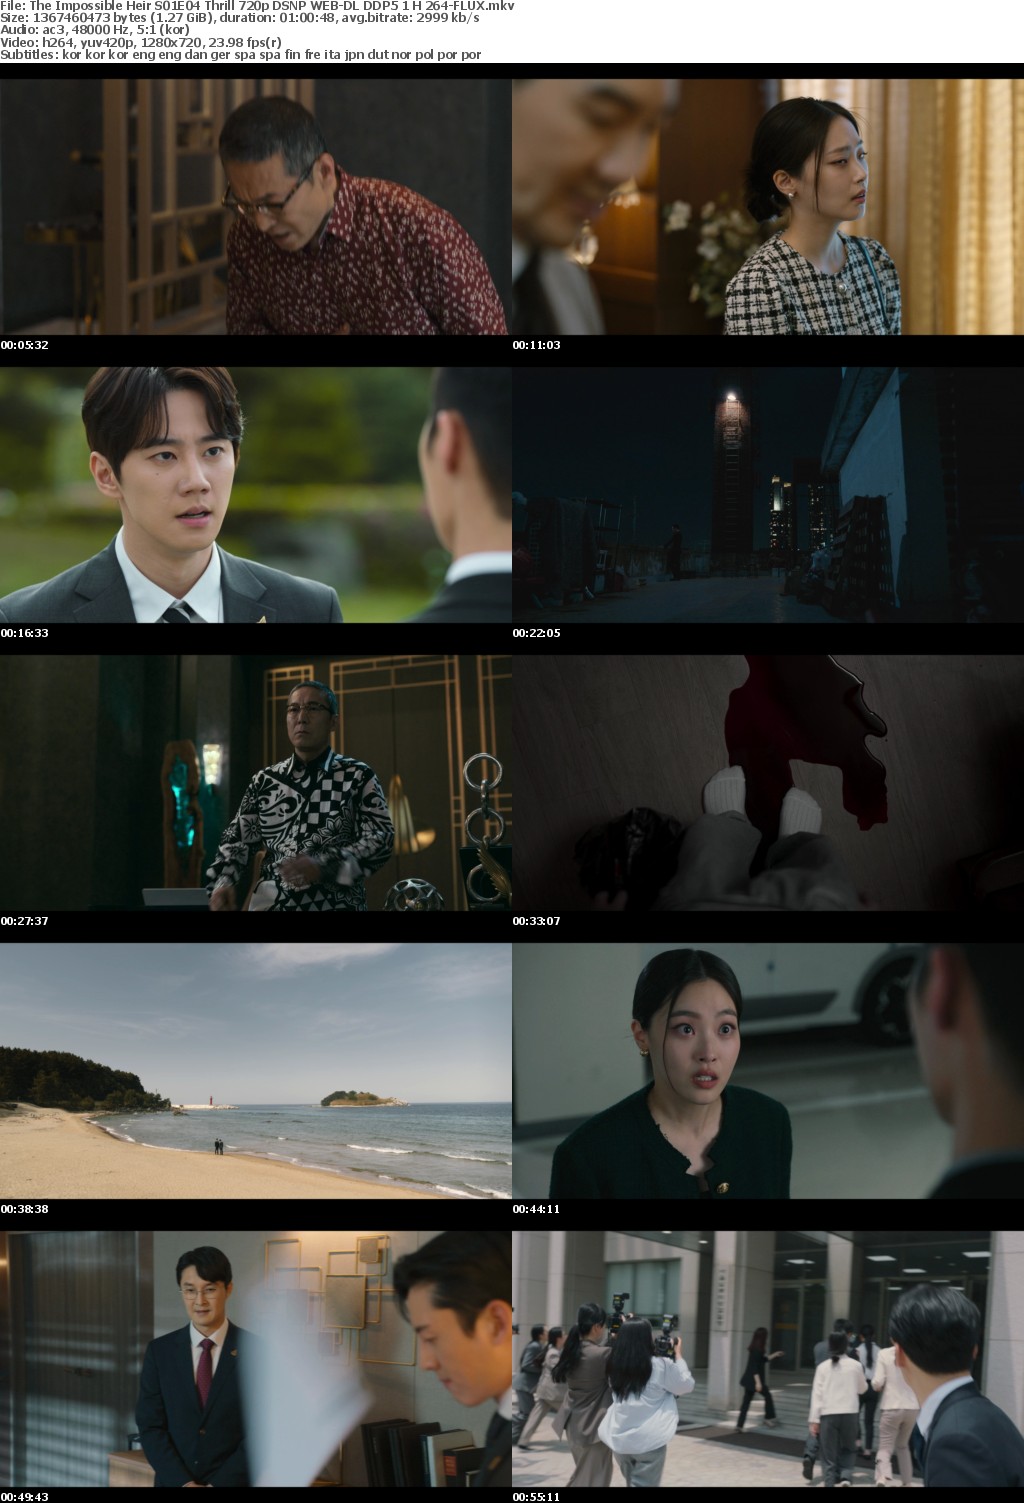 The Impossible Heir S01E04 Thrill 720p DSNP WEB-DL DDP5 1 H 264-FLUX